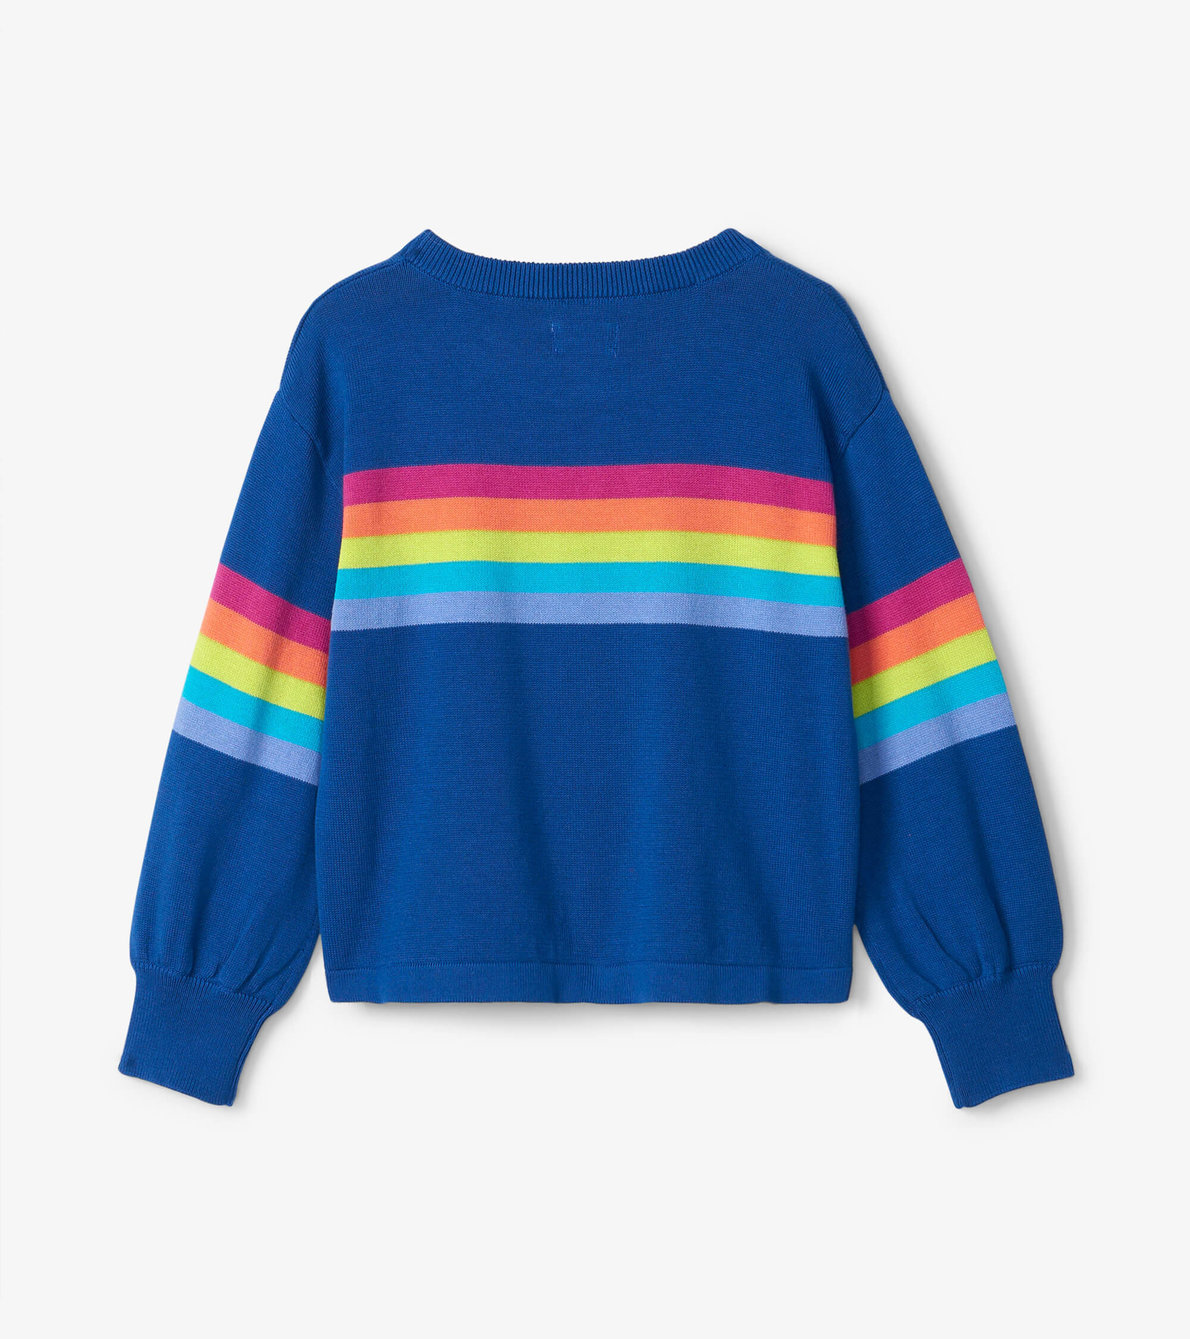 View larger image of Girls Groovy Stripes Sweater